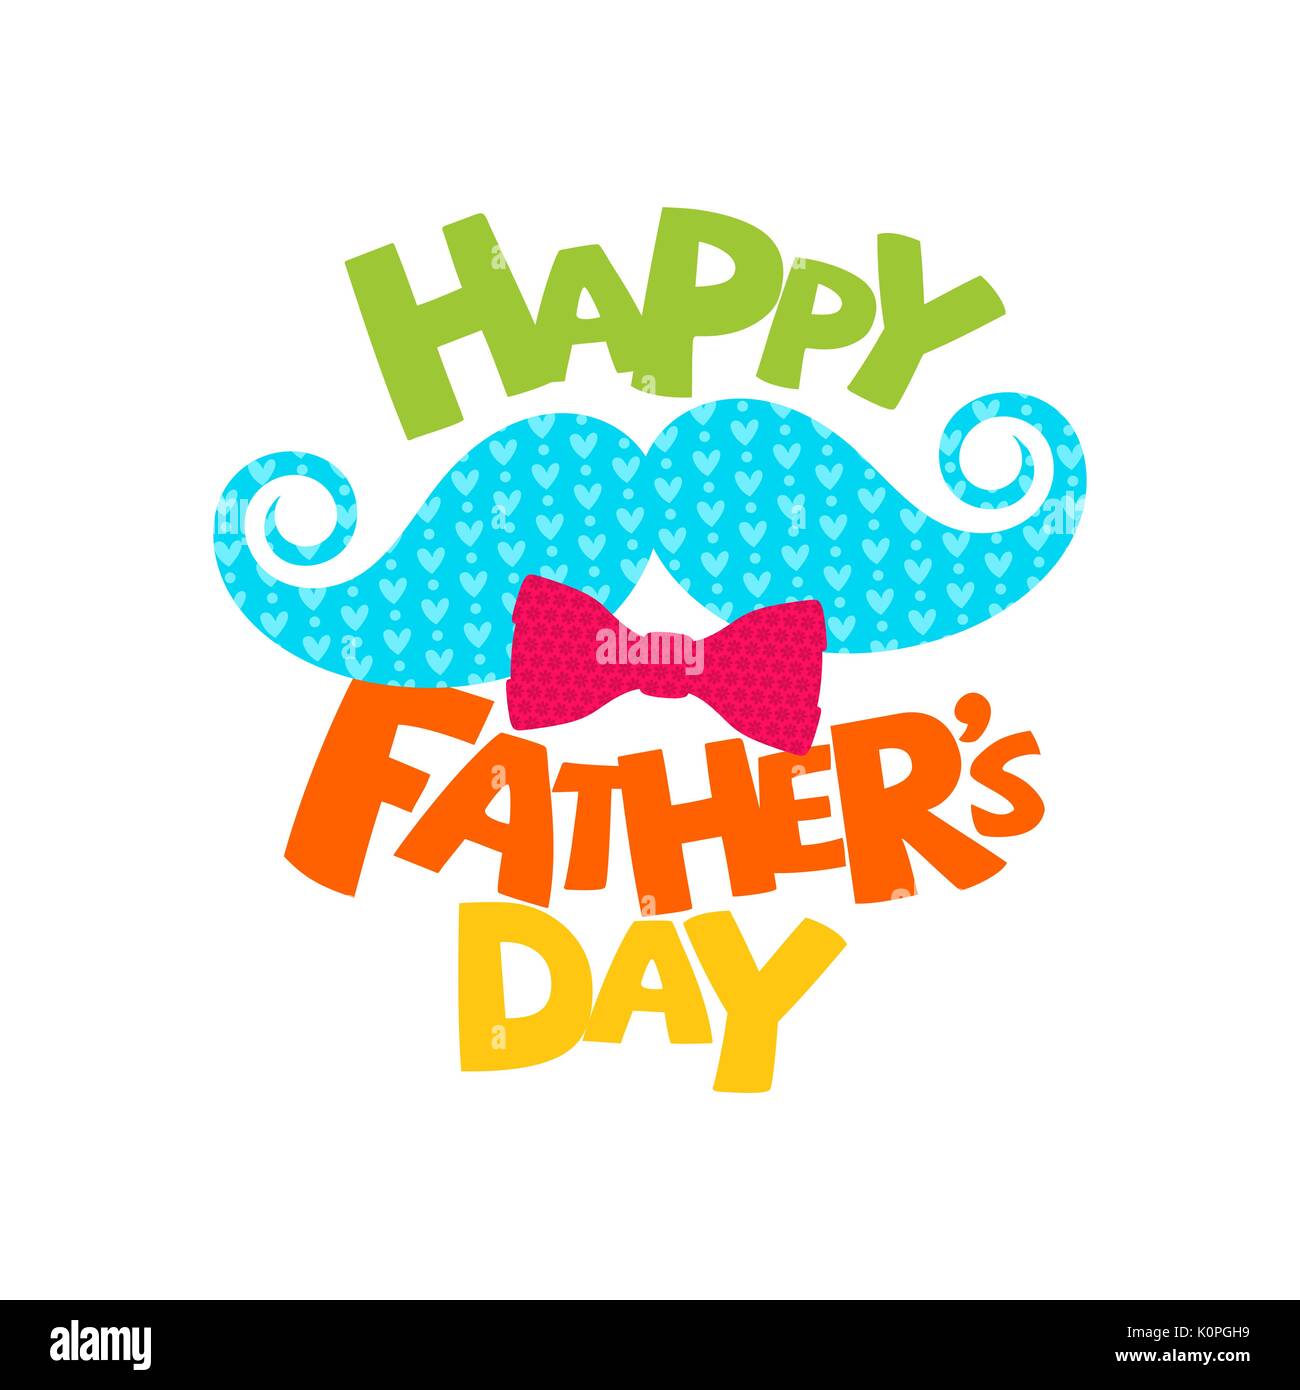 Typography and lettering with designer colored elements and silhouettes for a happy father's day Stock Vector